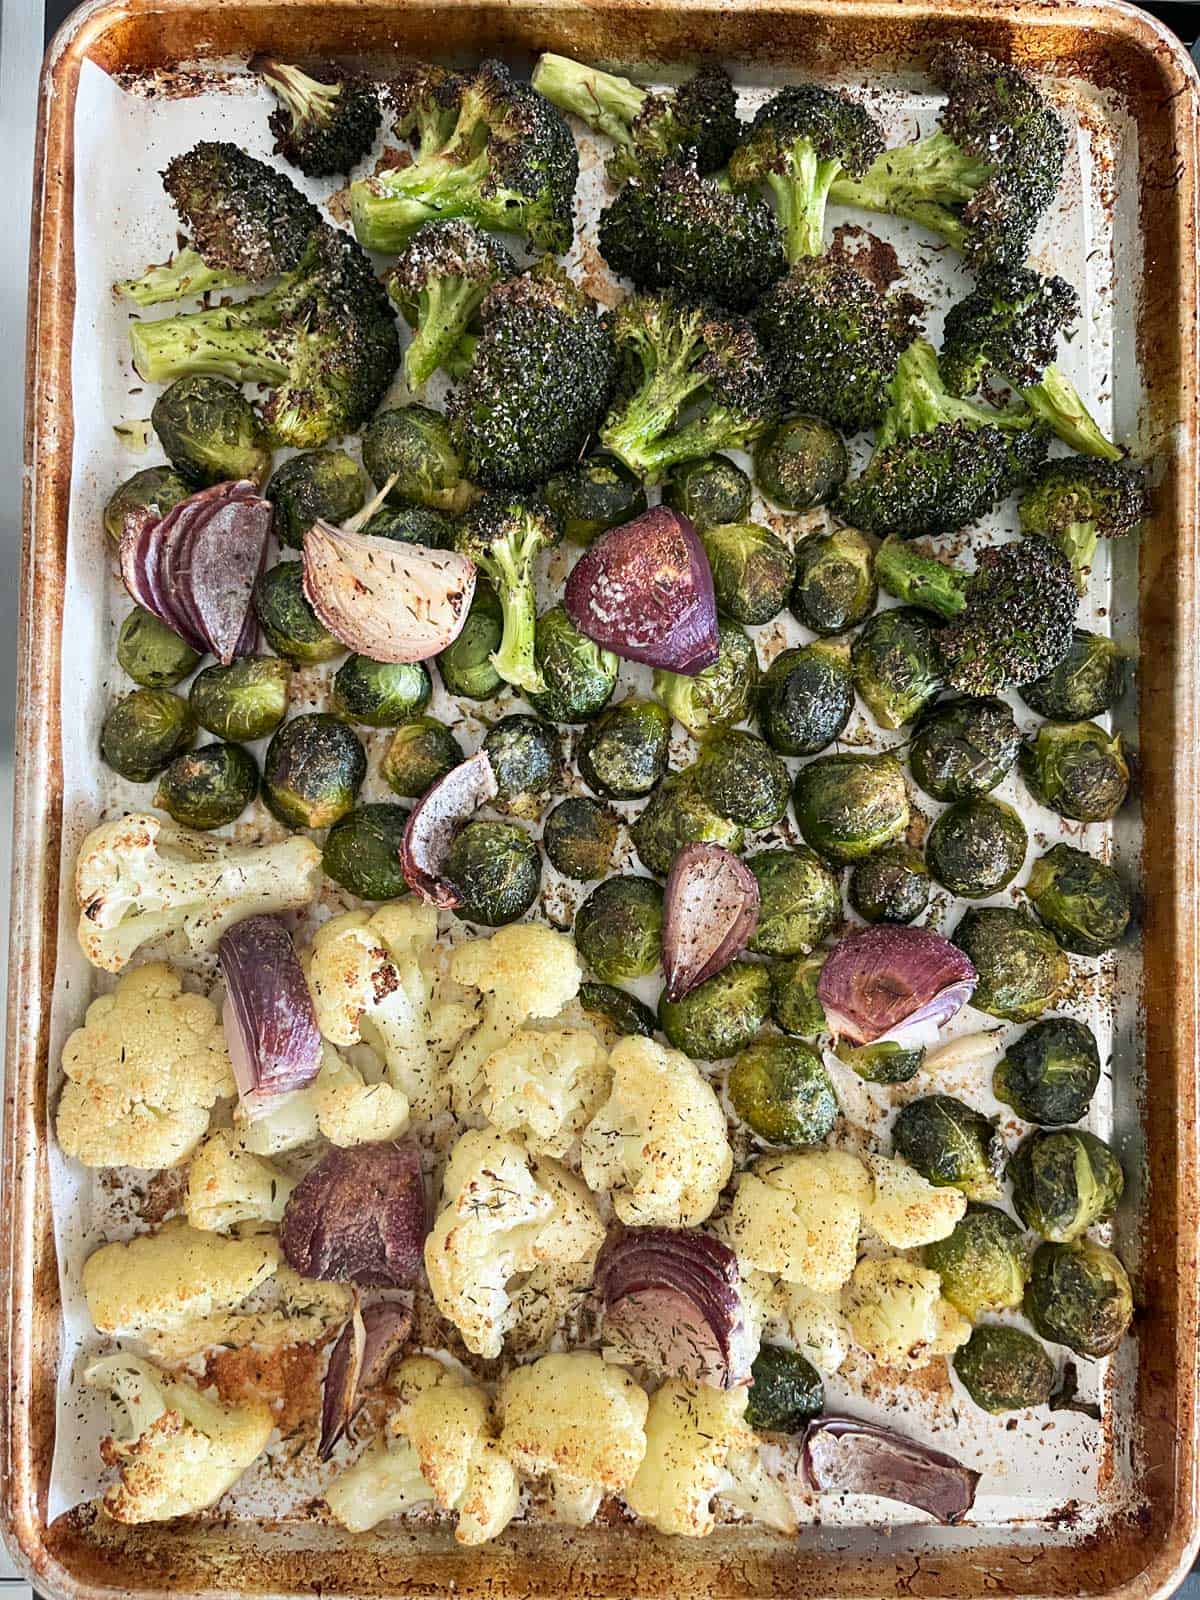 Roasted vegetables without peppers.